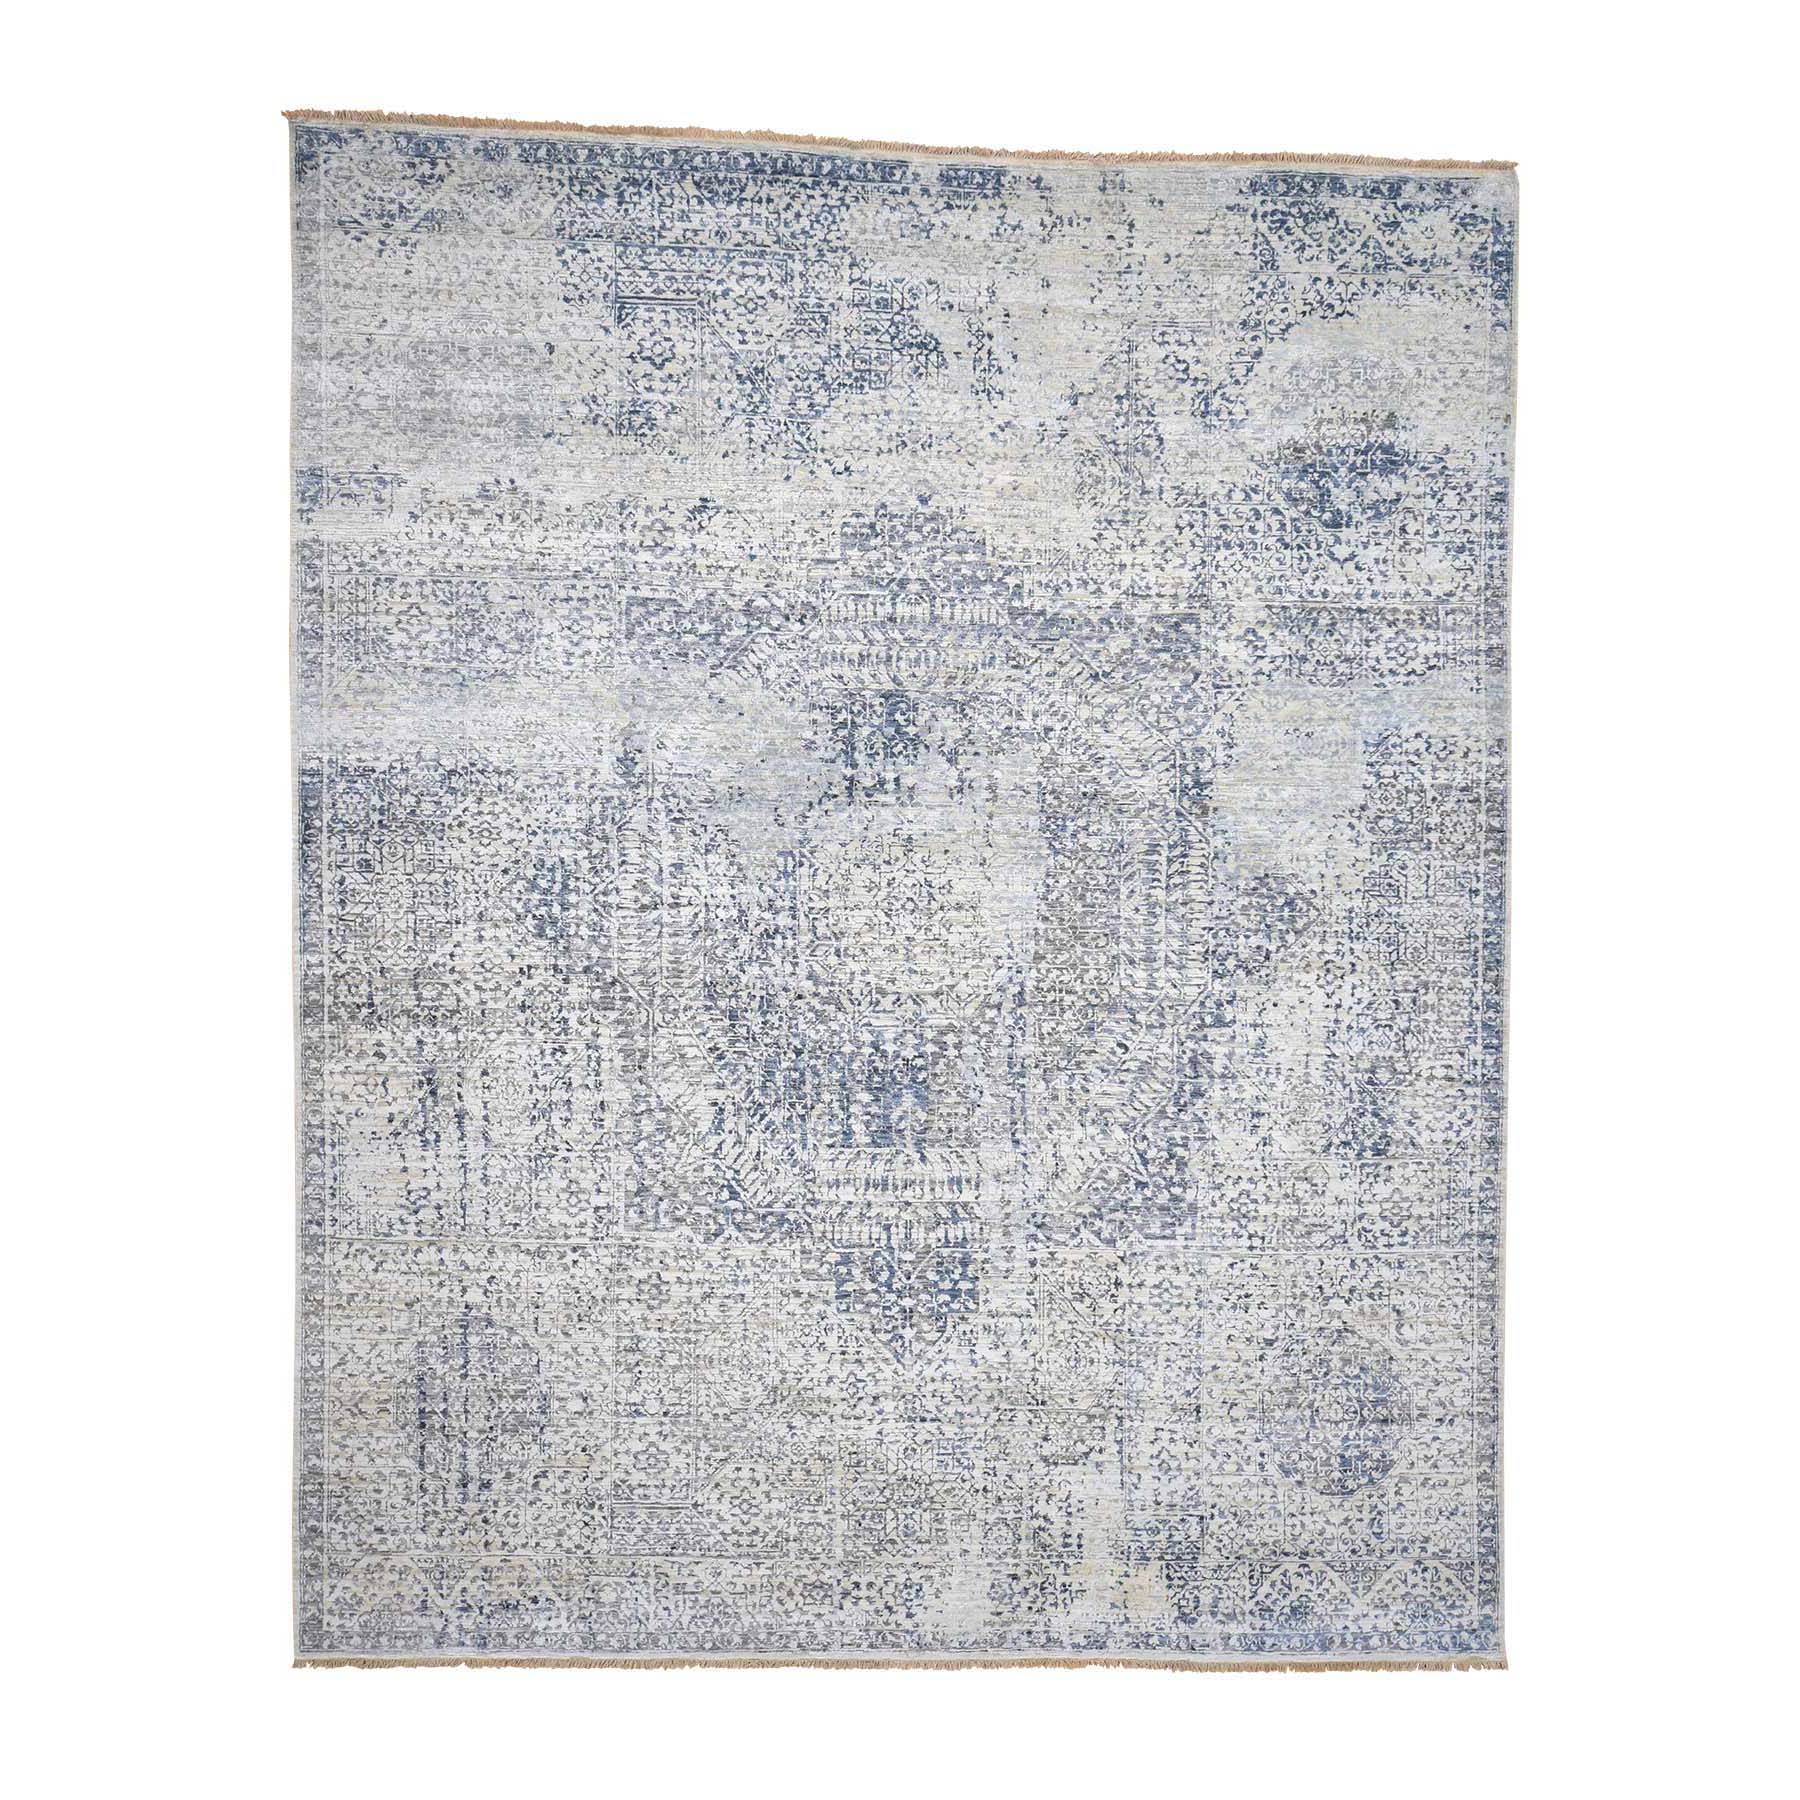 8'3"x10'2" Pure Silk With Textured Wool Vintage Hand Woven Mamluk Rug 